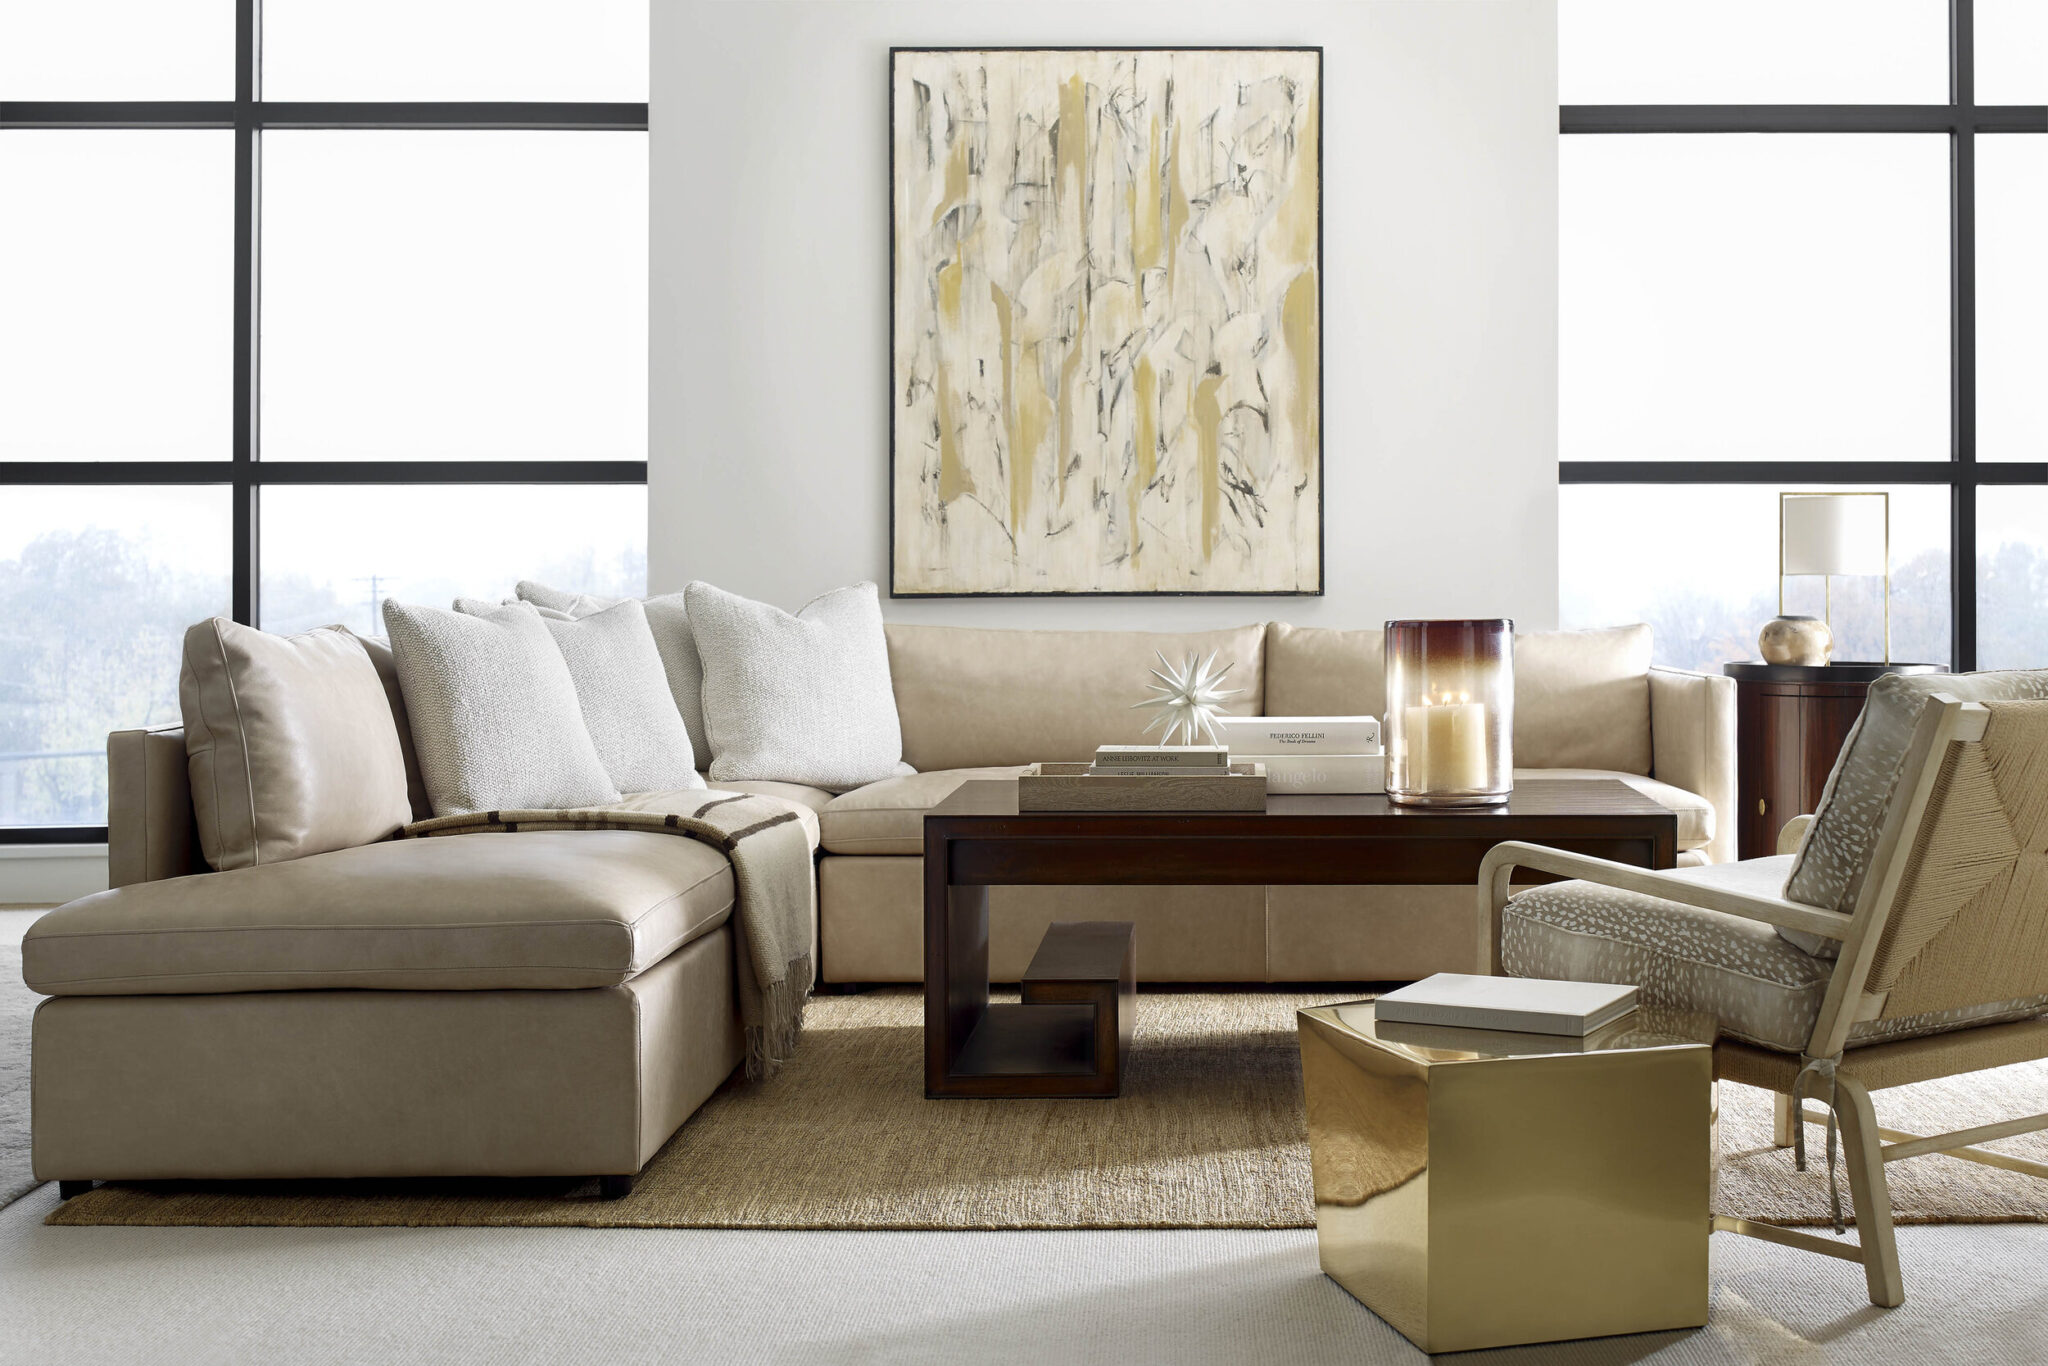 Affordable Ways To Add Luxury Furniture Brands To Your Home